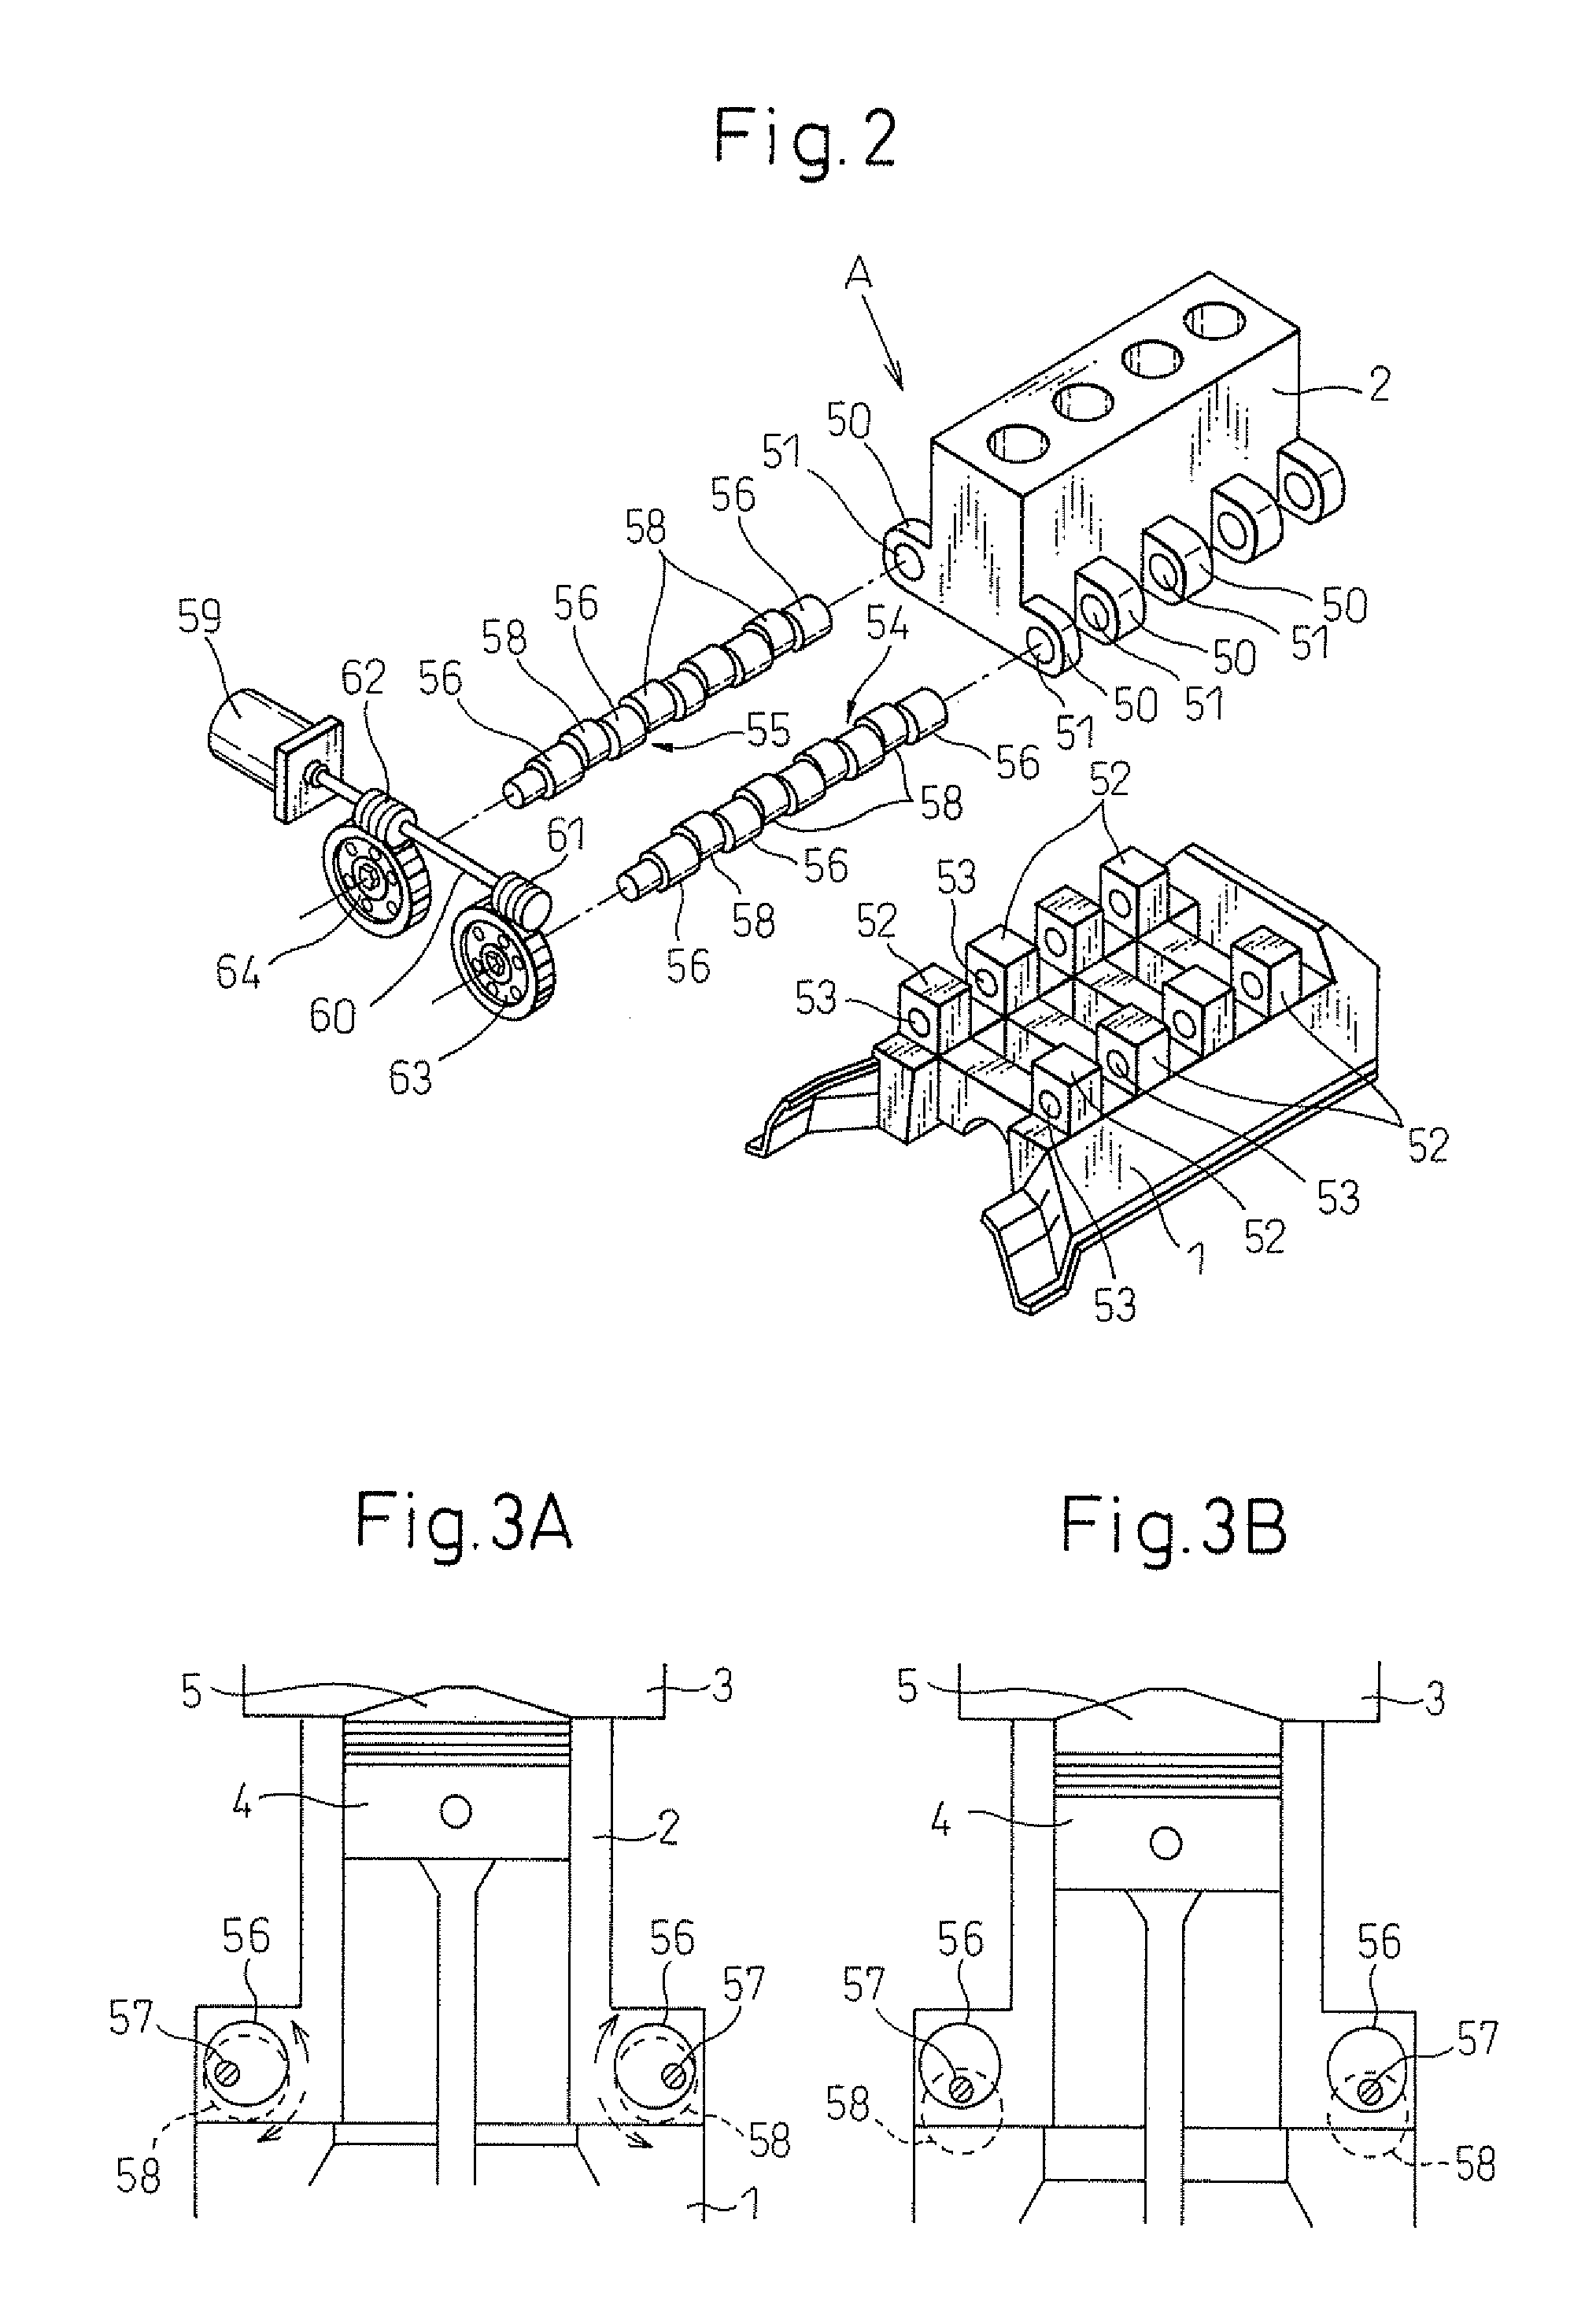 Spark ignition type internal combustion engine